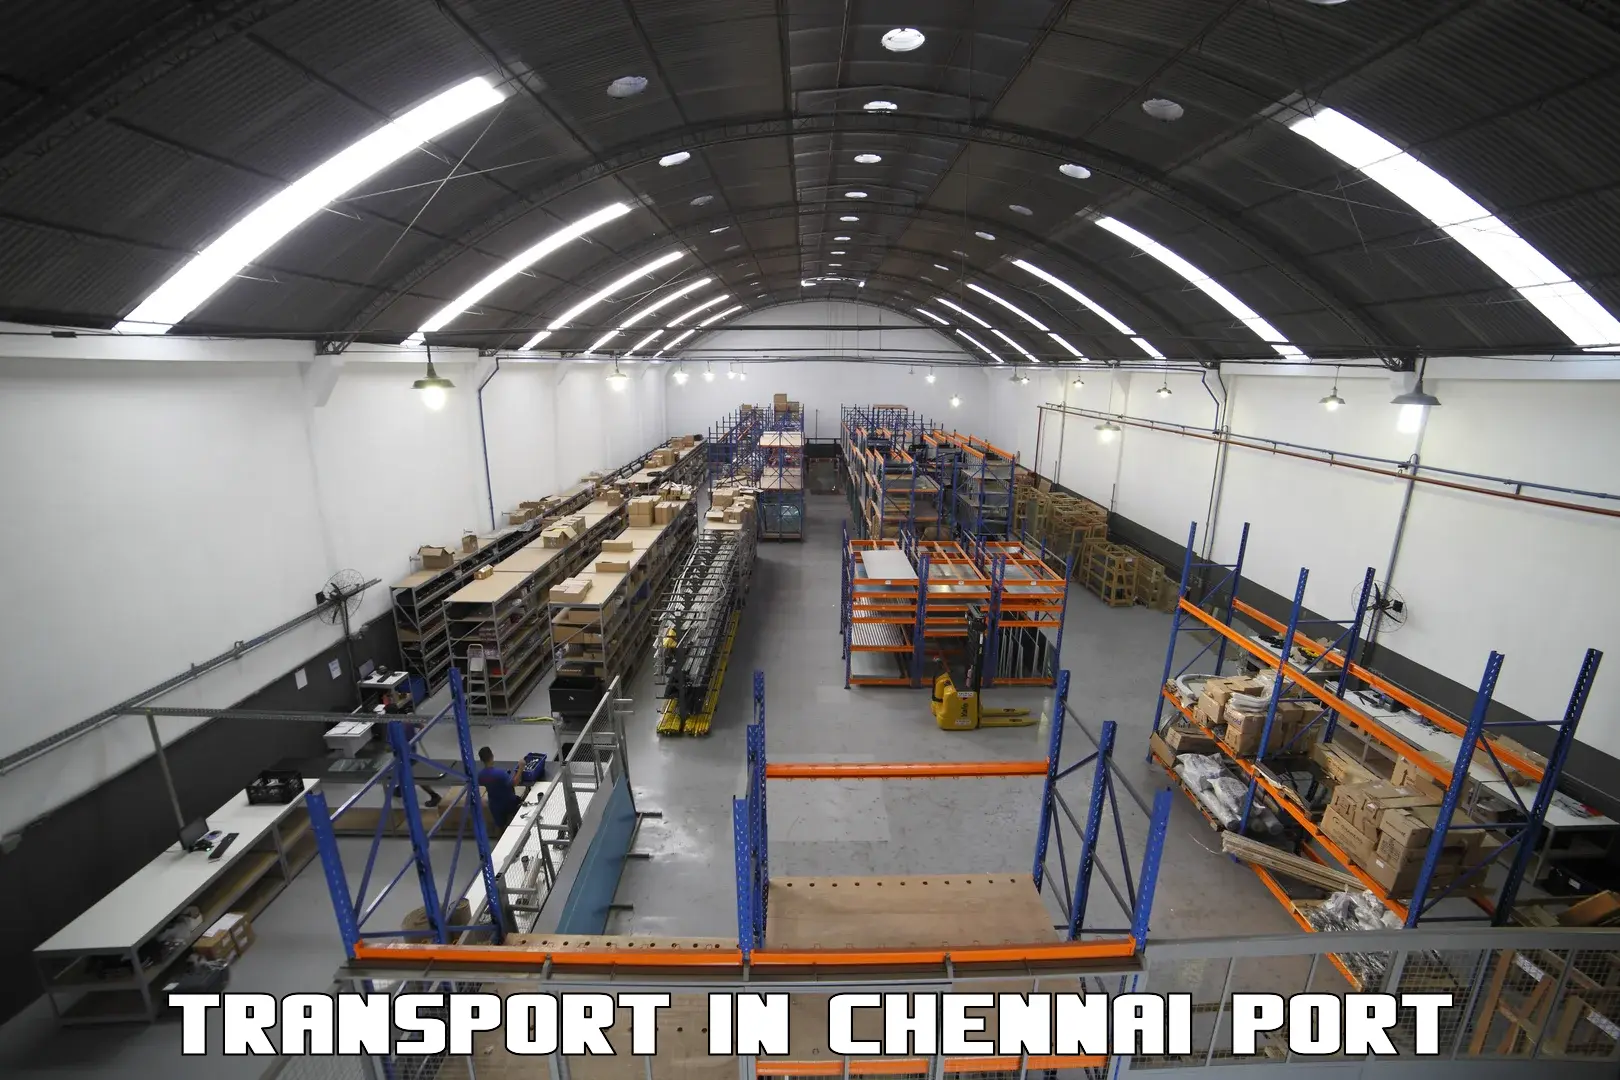 Road transport services in Chennai Port